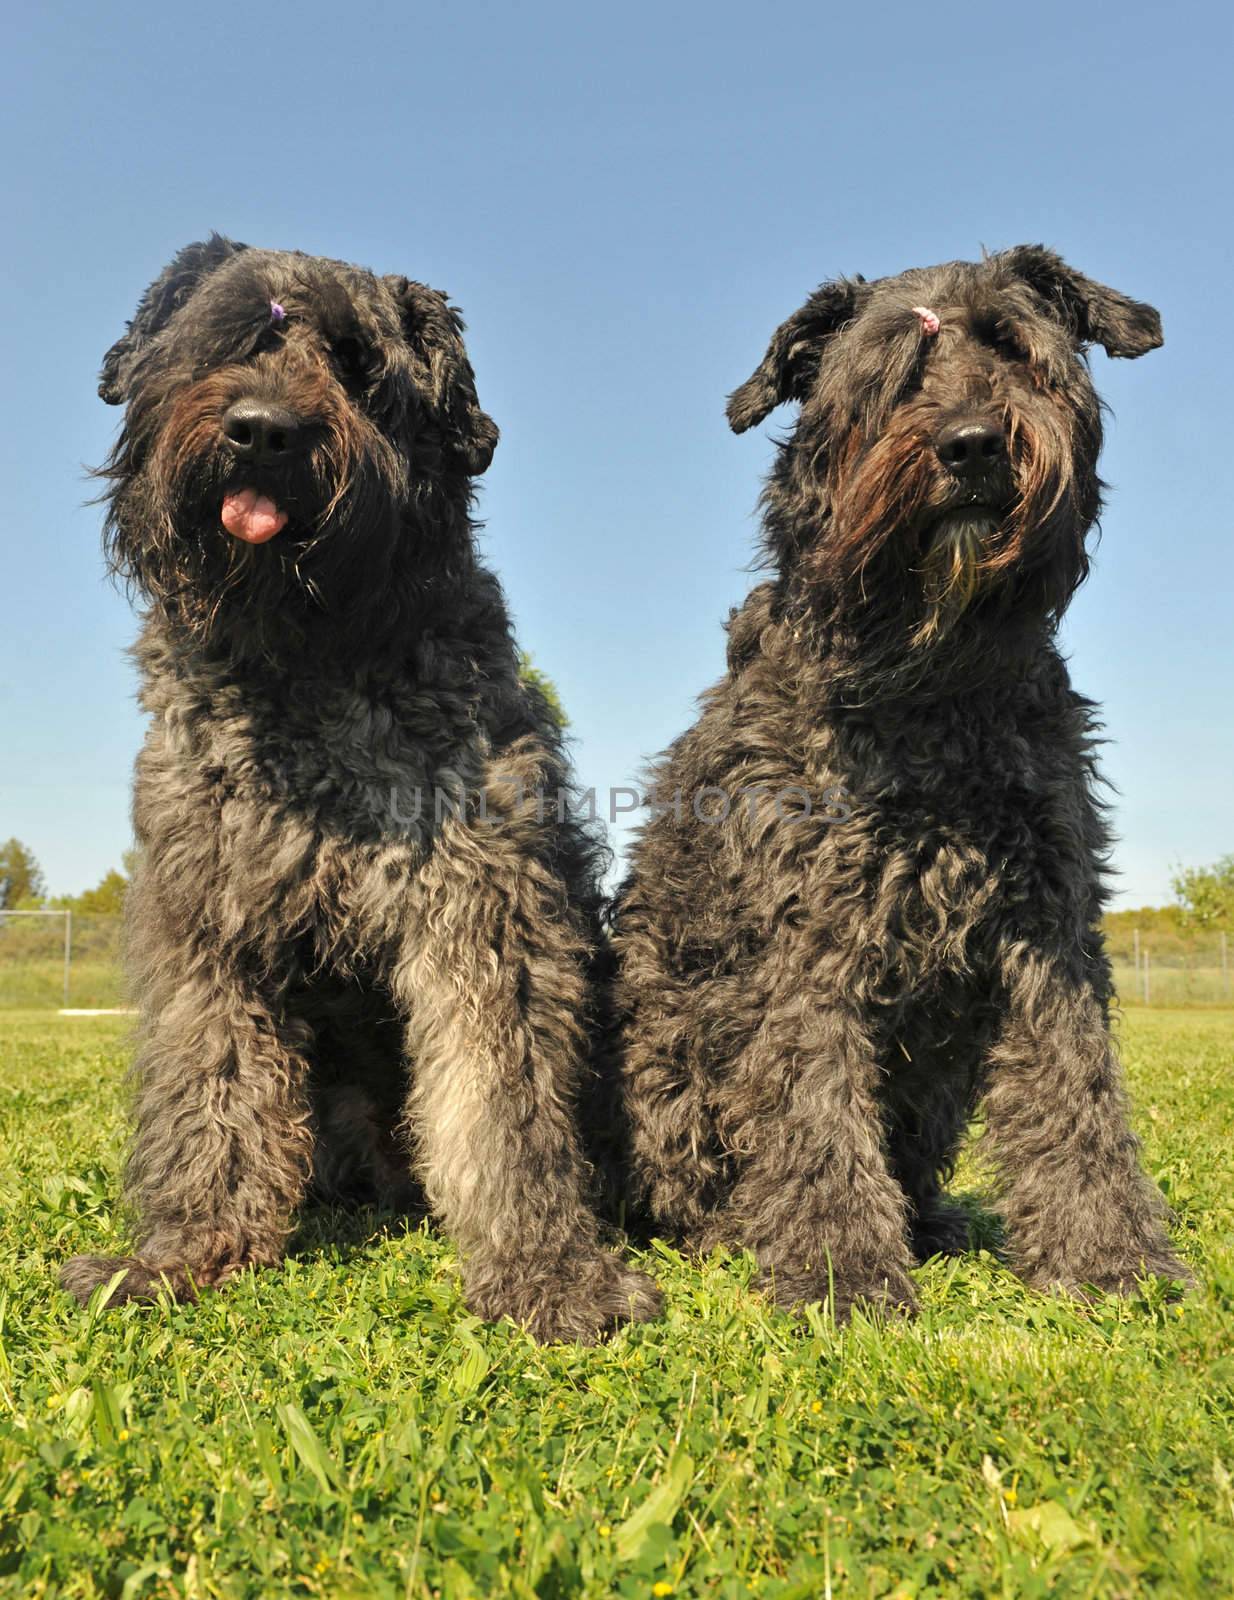 two dogs "bouvier des Flandres" sitting in a field